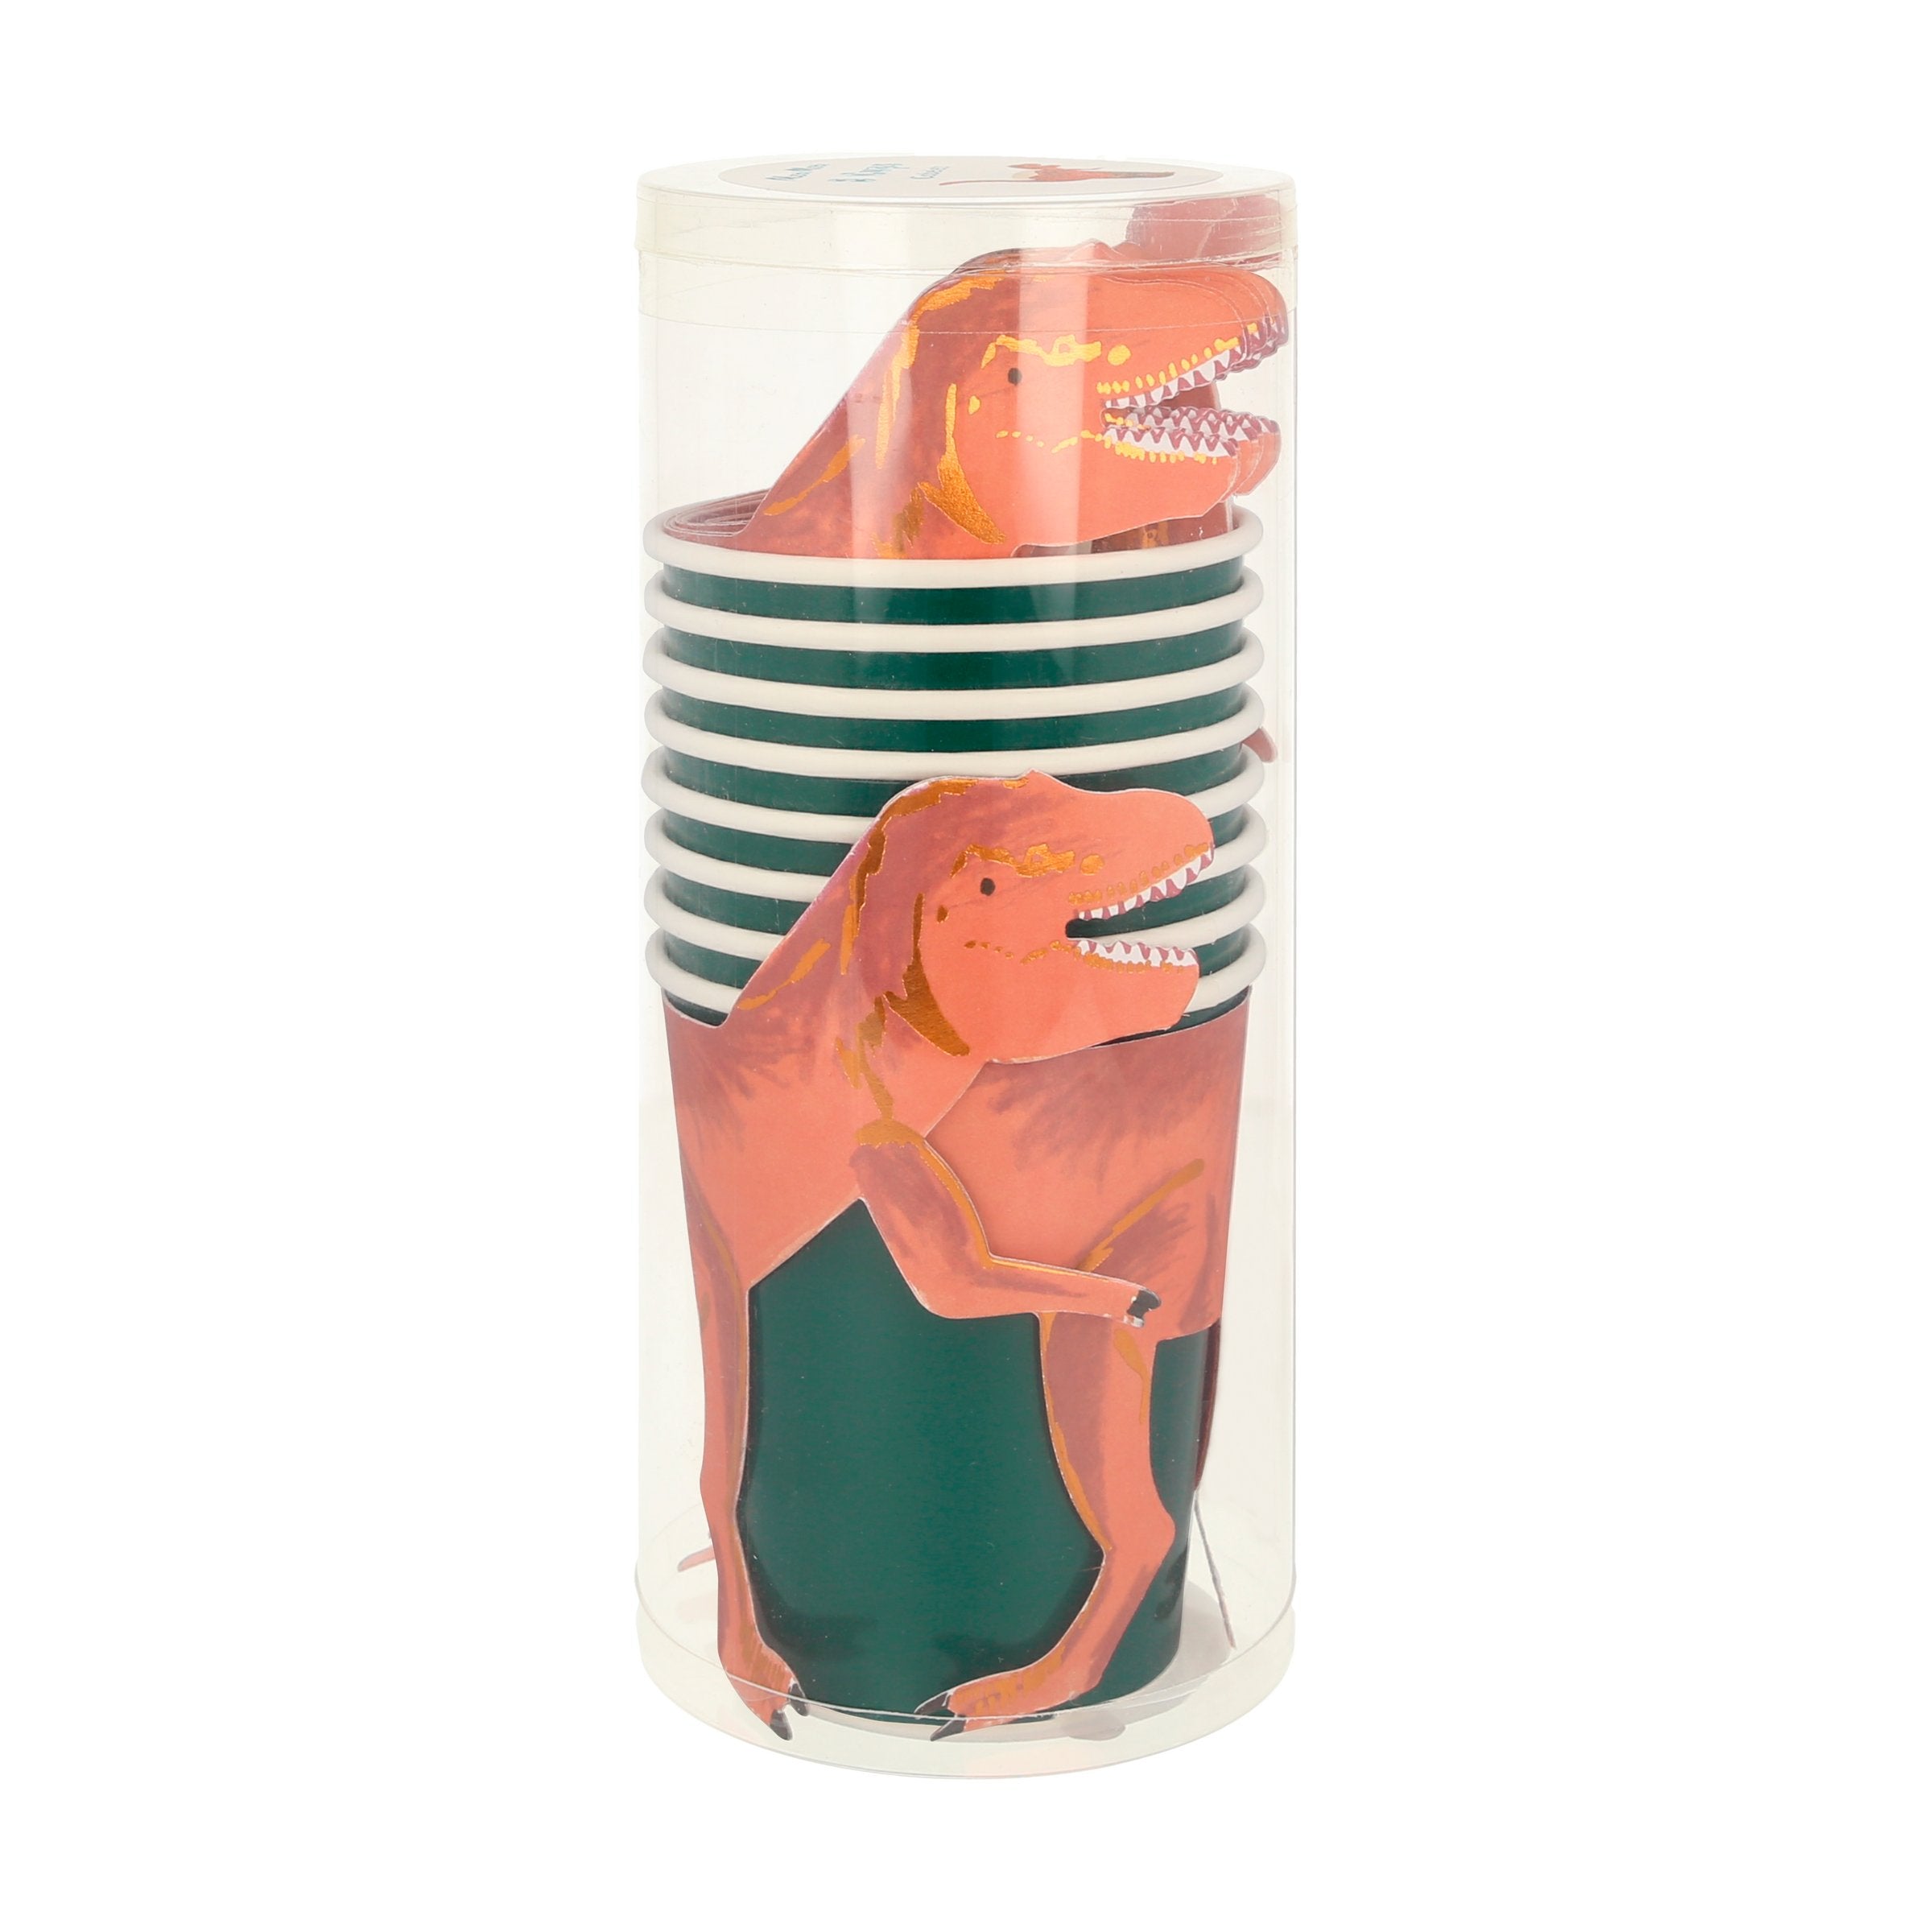 The 3D T-Rex detail on our dinosaur cups make the perfect dinosaur party decorations.